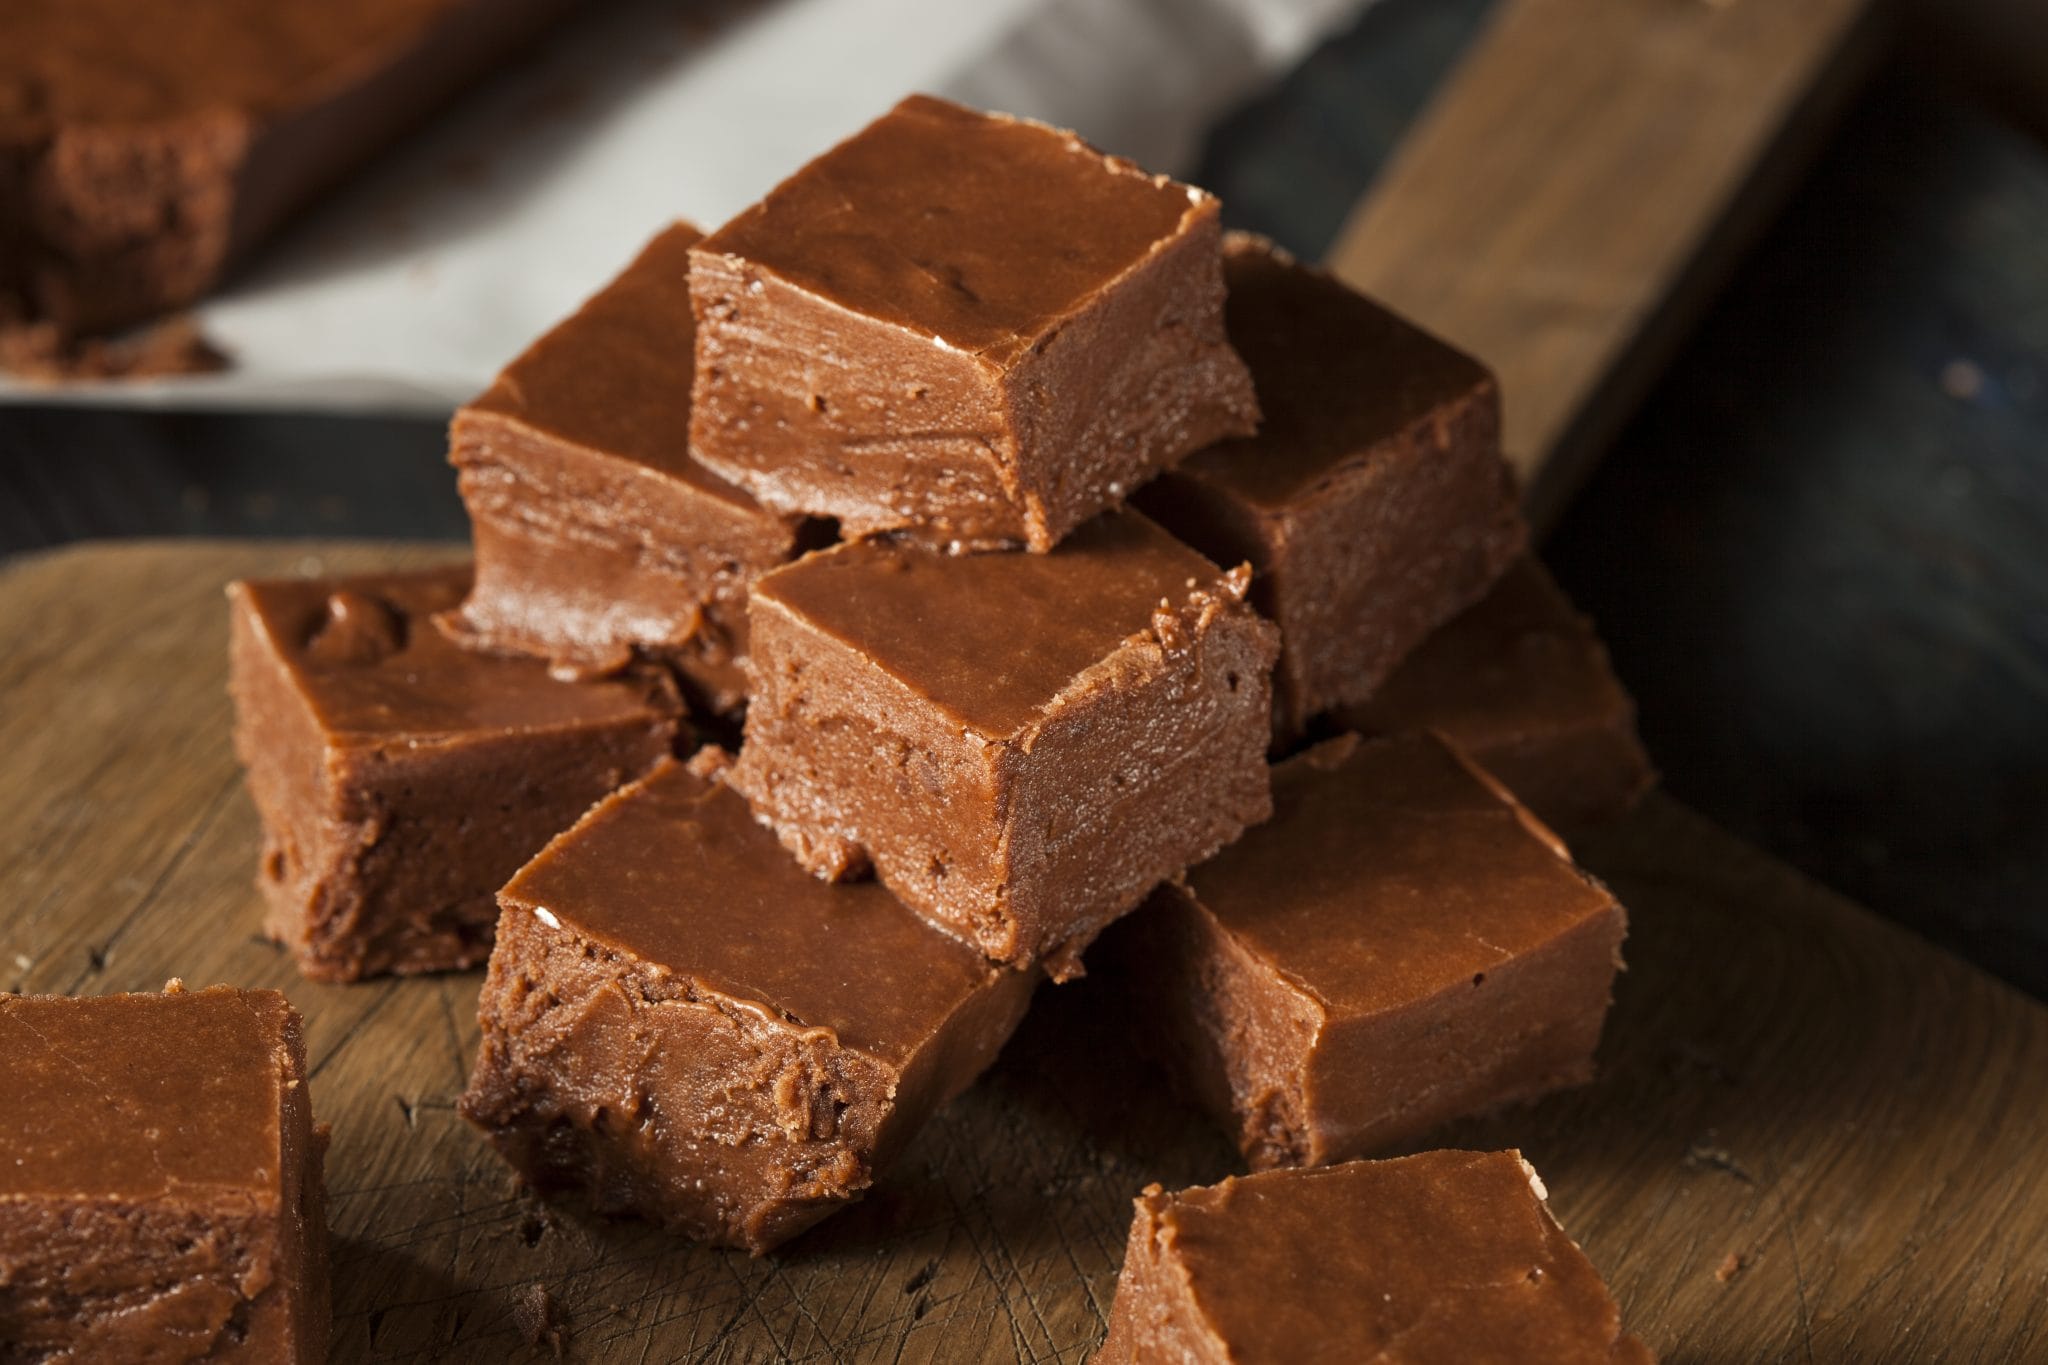 A pyramid-shaped stack of chocolate fudge squares.